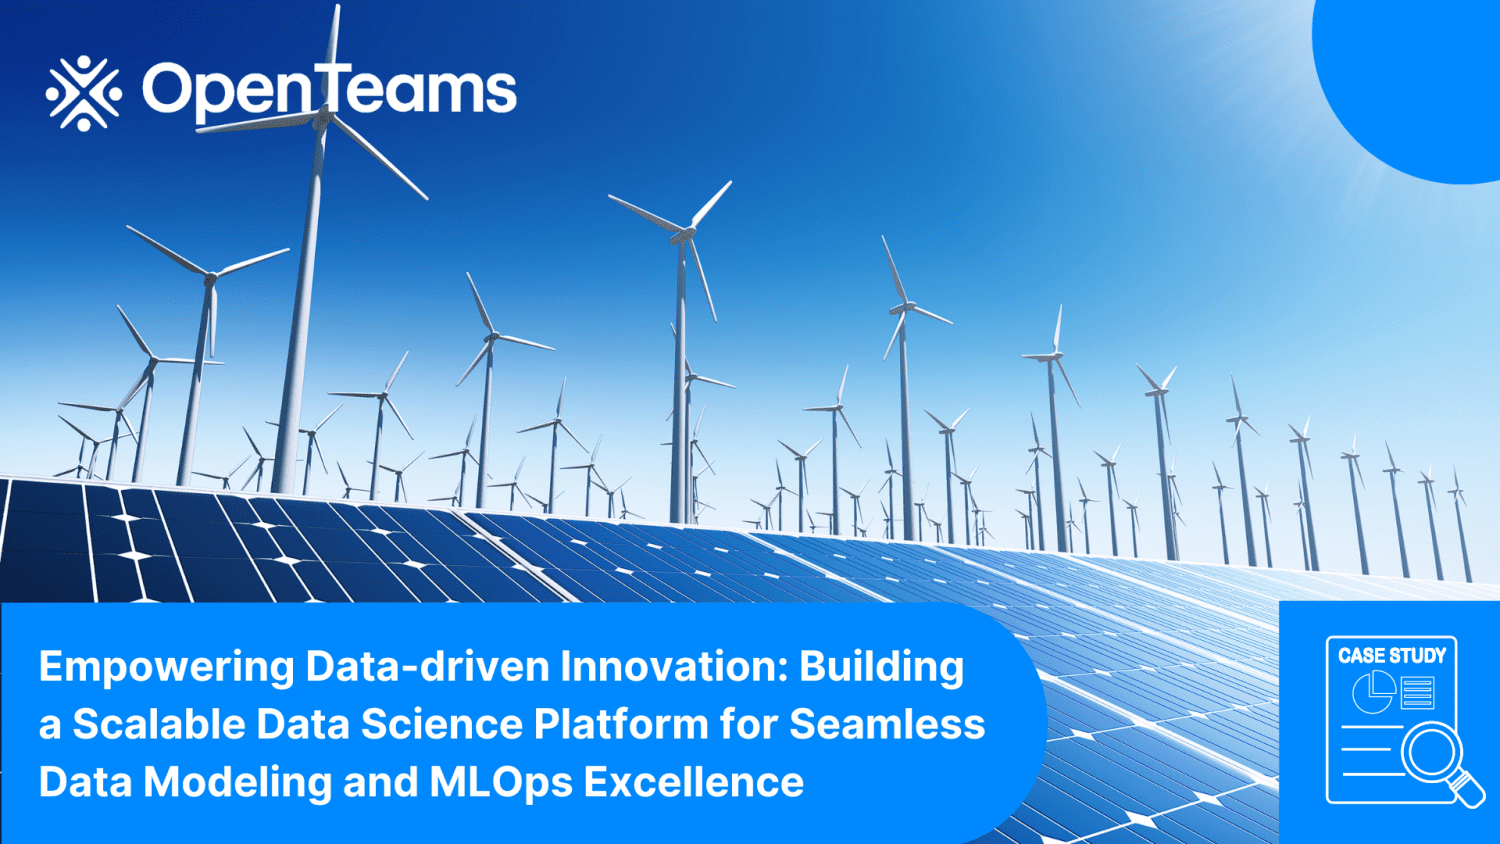 Empowering Data-driven Innovation: Building a Scalable Data Science Platform for Seamless Data Modeling and MLOps Excellence